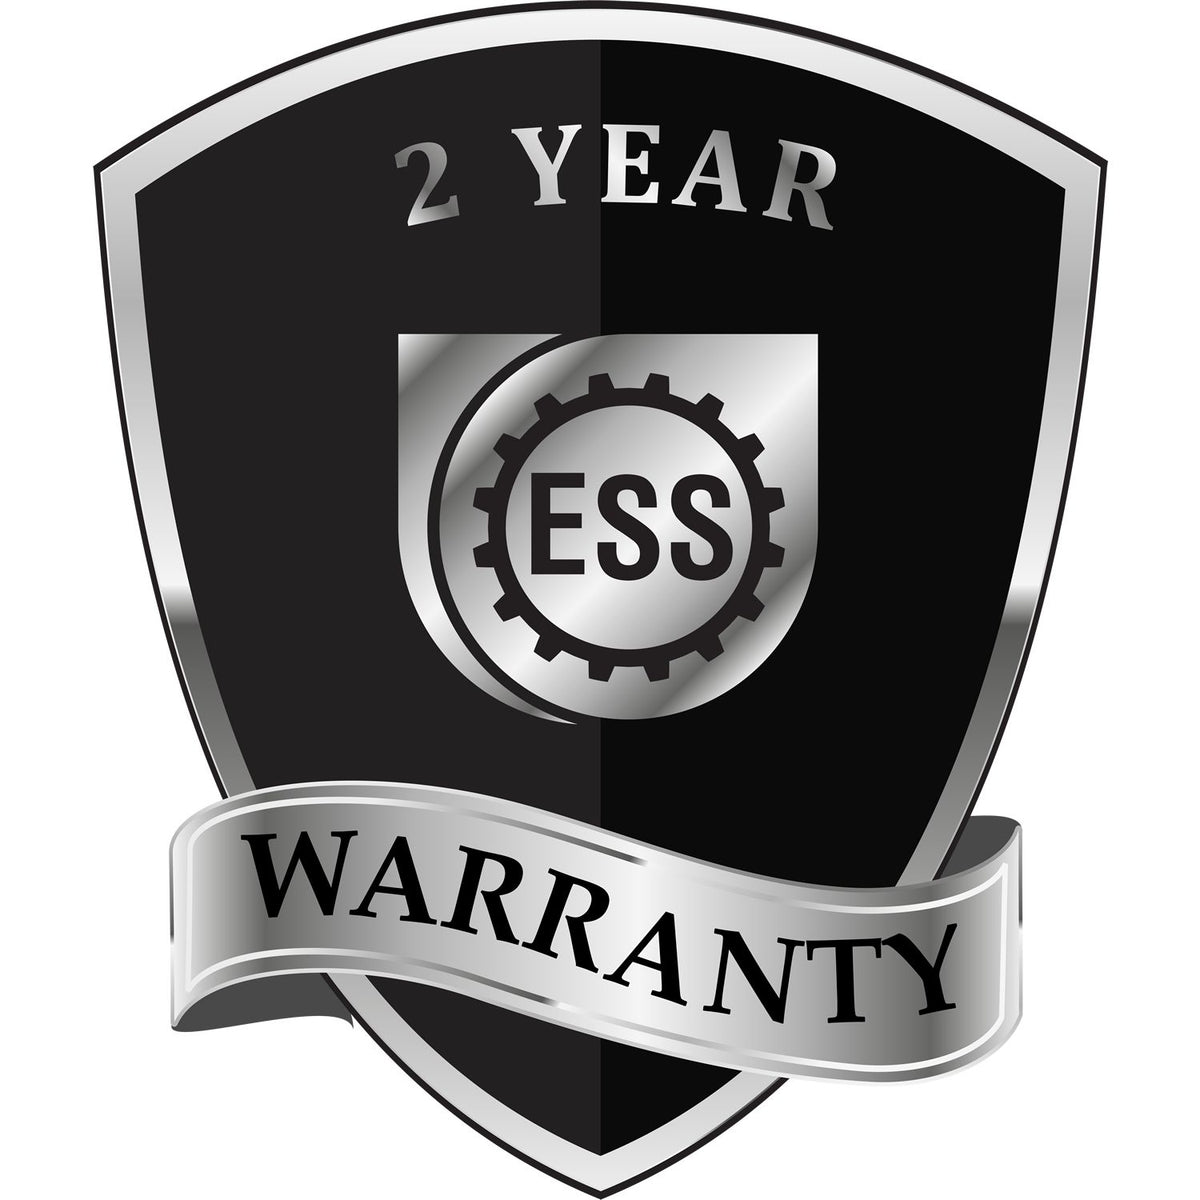 A black and silver badge or emblem showing warranty information for the Hybrid Pennsylvania Engineer Seal